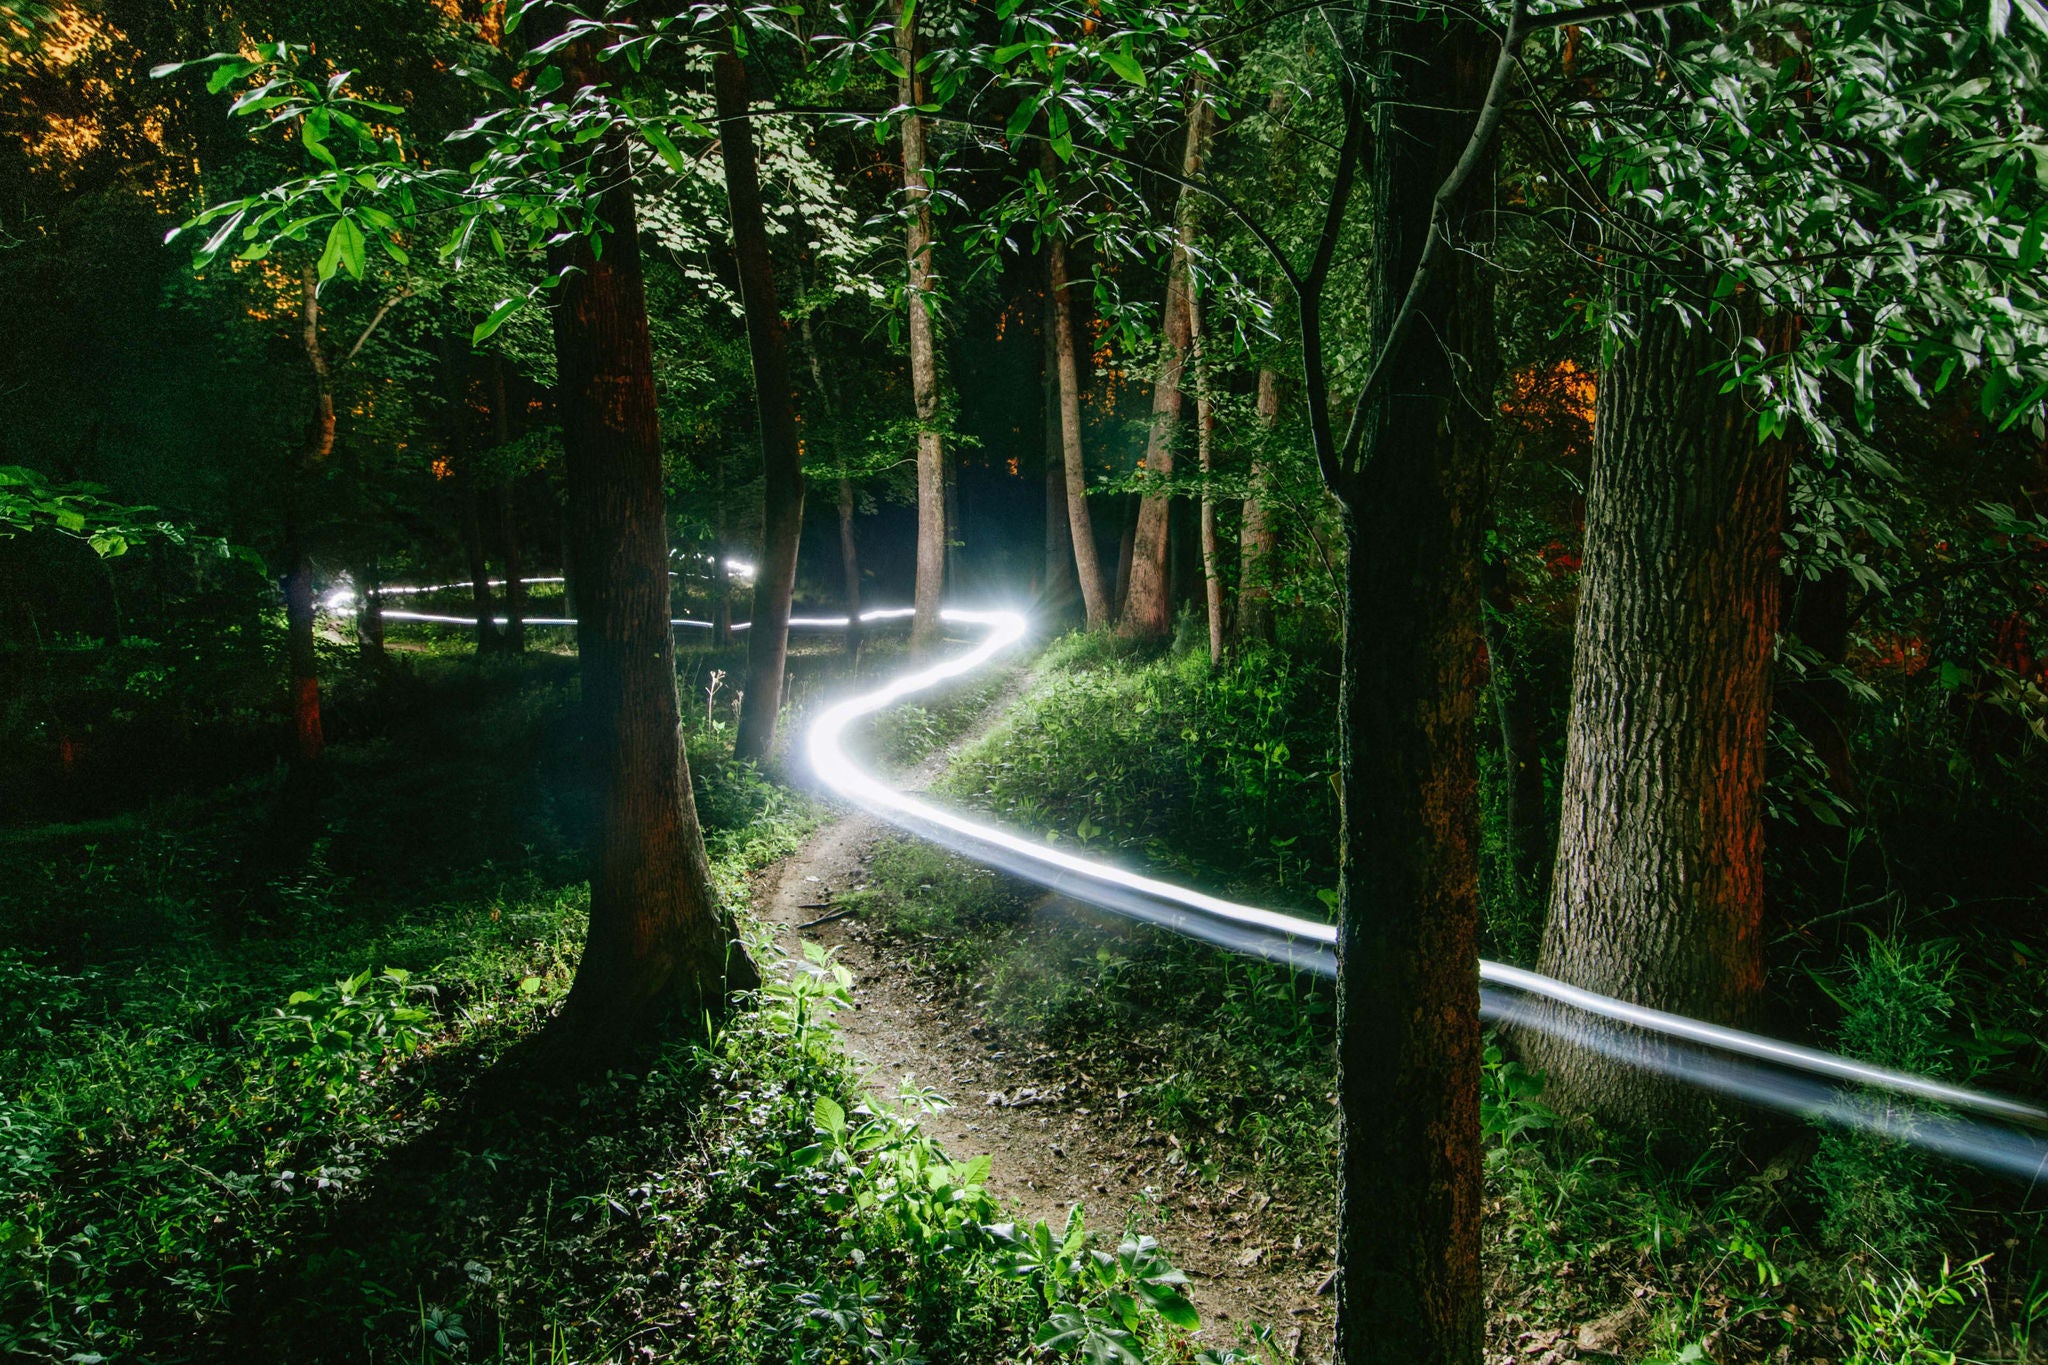 Conyers, GA - May 21: The streaks of a rider's headlamp make a winding trail through the woods during the Granny Gear 24 Hours of Conyers 24-hour mountain bike race in Conyers, Georgia.